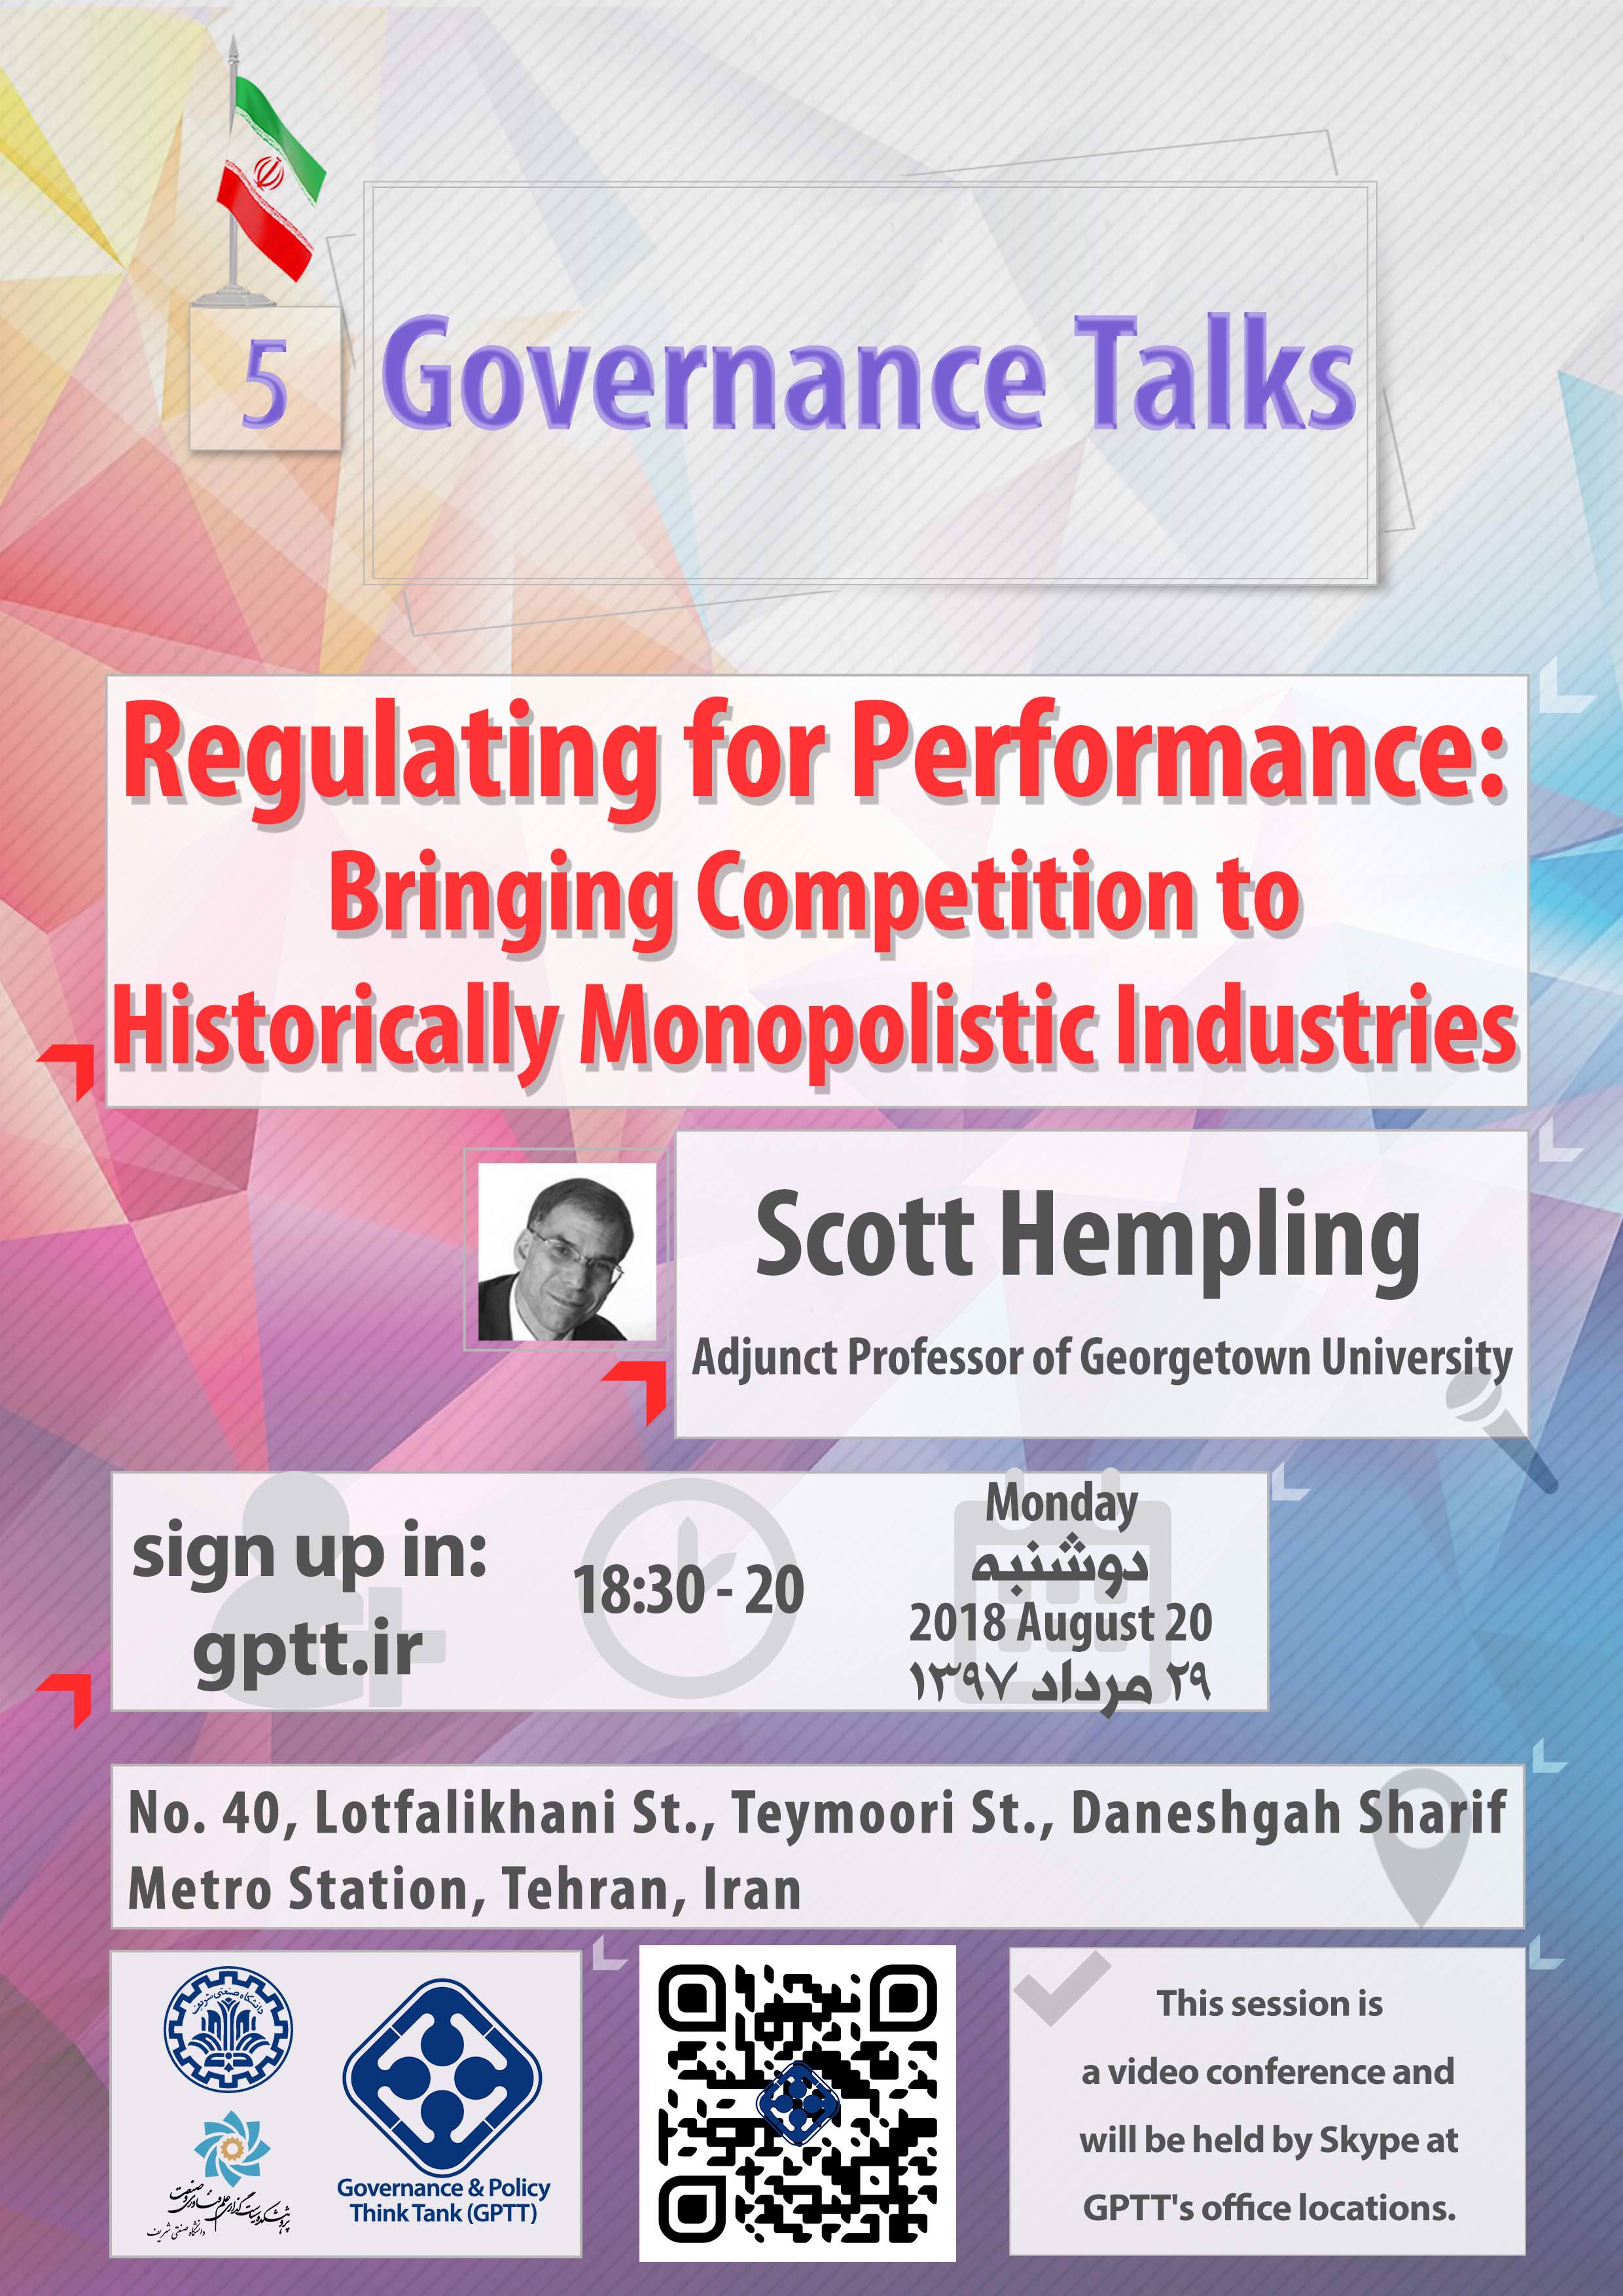 Governance Talks 5: Regulating for Performance, Bringing Competition to Historically Monopolistic Industries